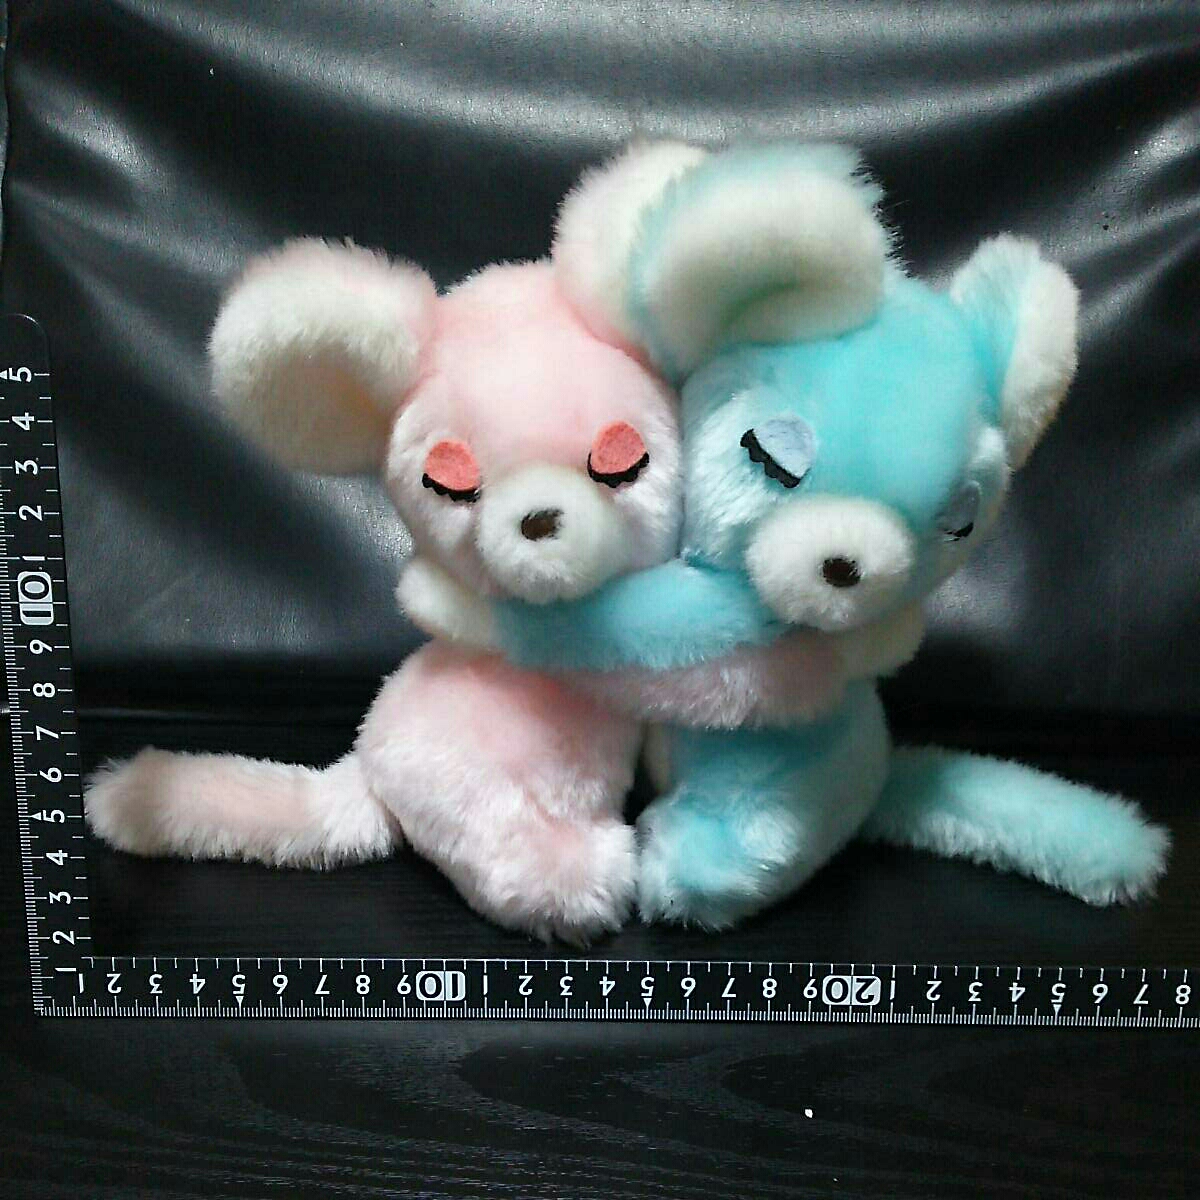  not for sale? mouse? Rav Rav *a Beck * wood li middle ...( laughing )* soft toy? dream equipped .~!...~* remainder 1